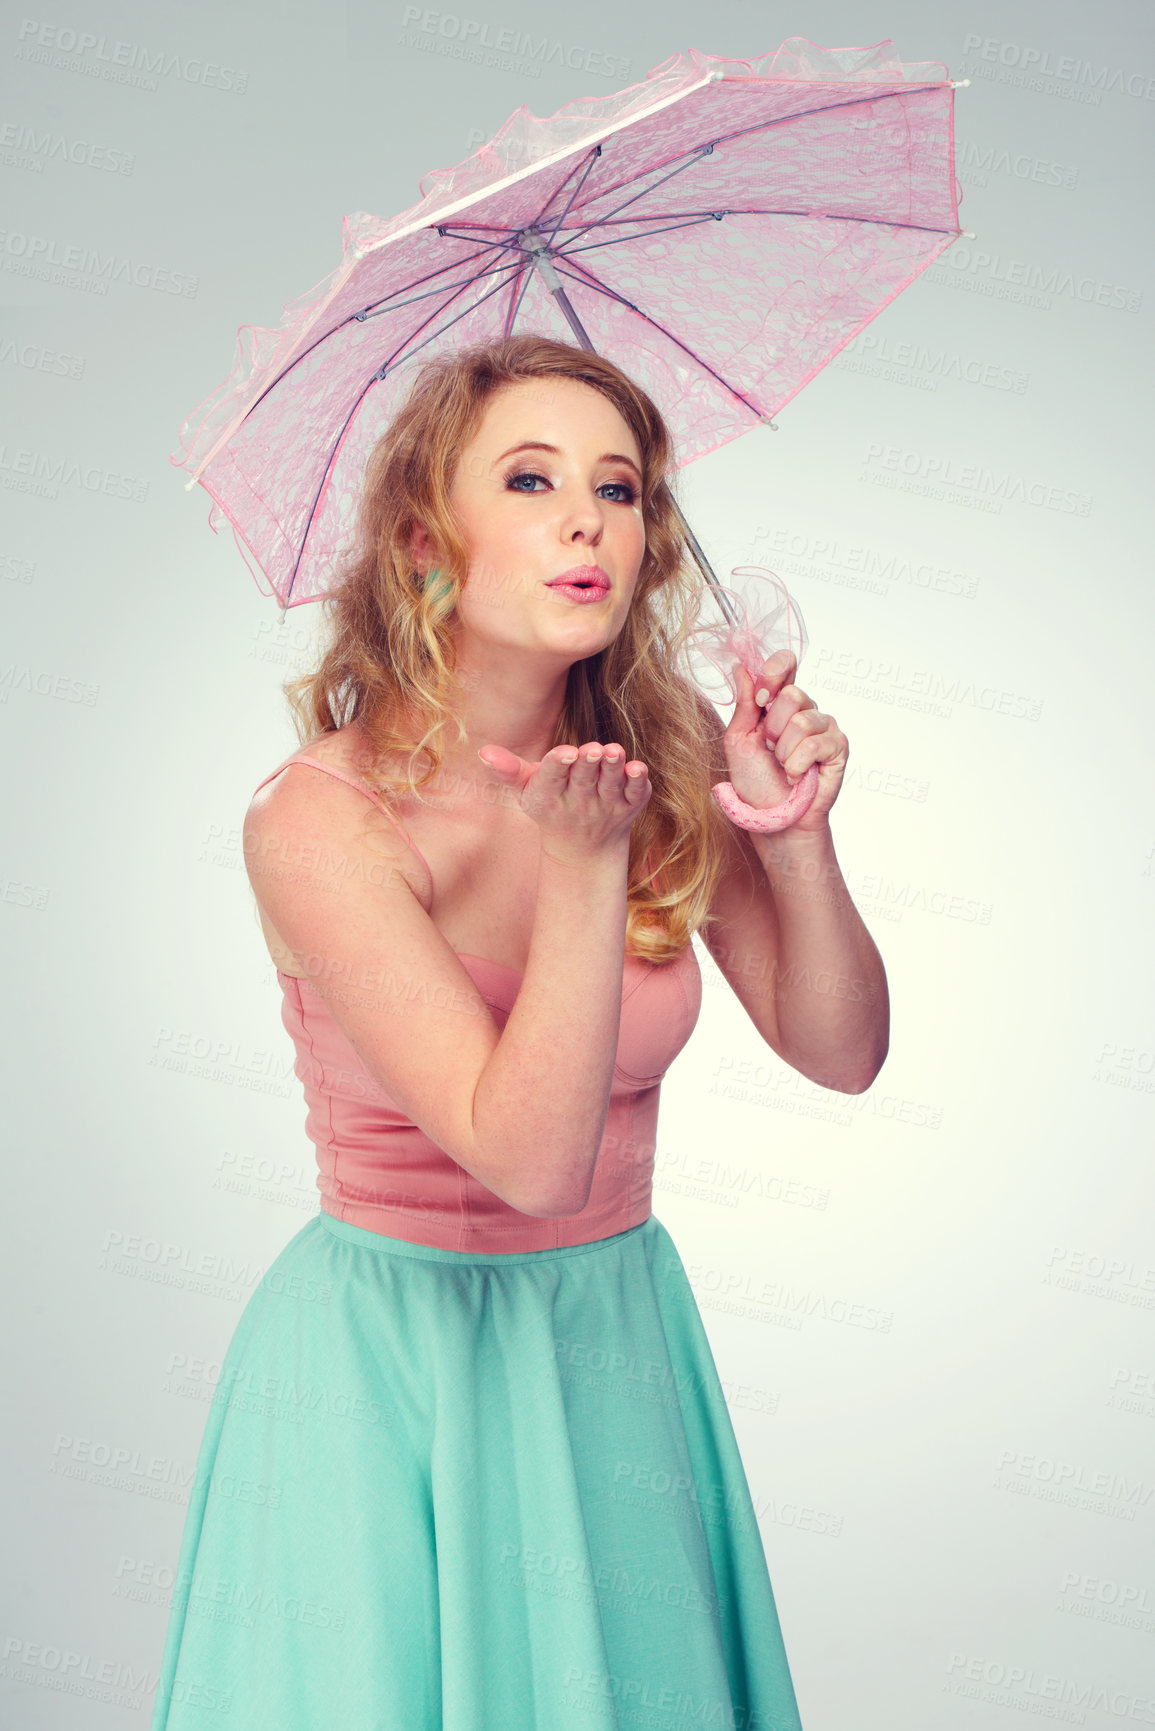 Buy stock photo Shot of a cute blonde girl blowing a kiss while holding a pink parasol